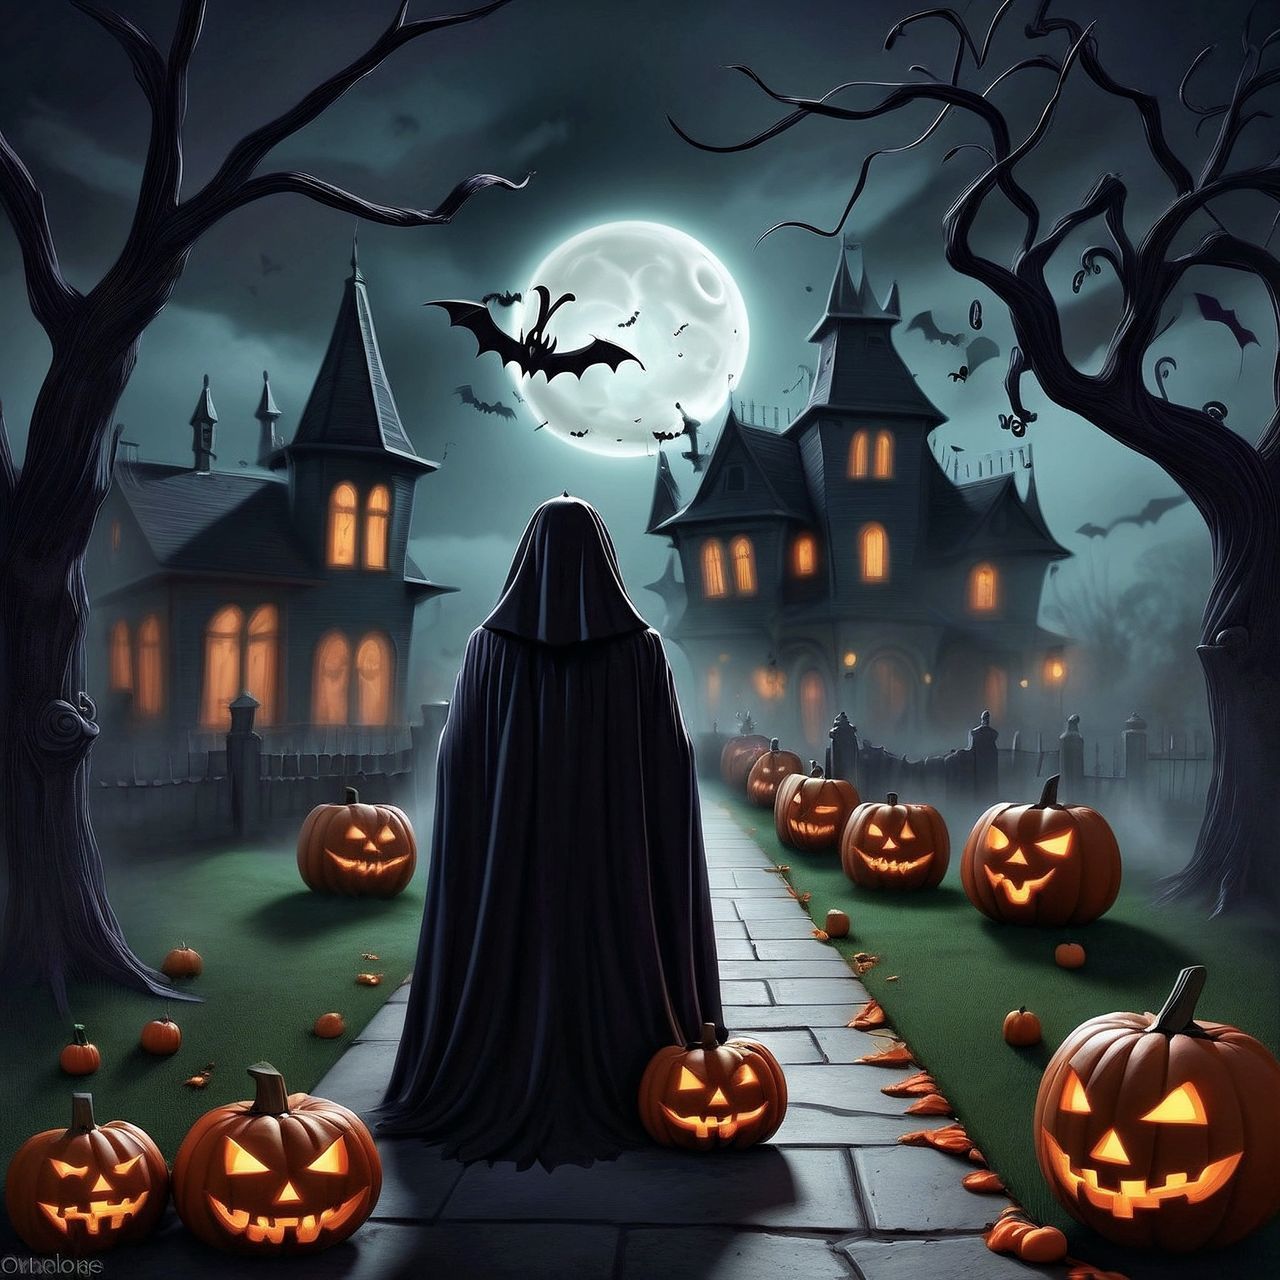 halloween, celebration, pumpkin, vegetable, holiday, spooky, cartoon, night, squash, religion, tradition, moon, food, food and drink, fear, jack-o'-lantern, witch, screenshot, decoration, nature, architecture, belief, horror, event, building, spirituality, dark, fantasy, autumn, illuminated, lighting equipment, fruit, sky, candle, no people